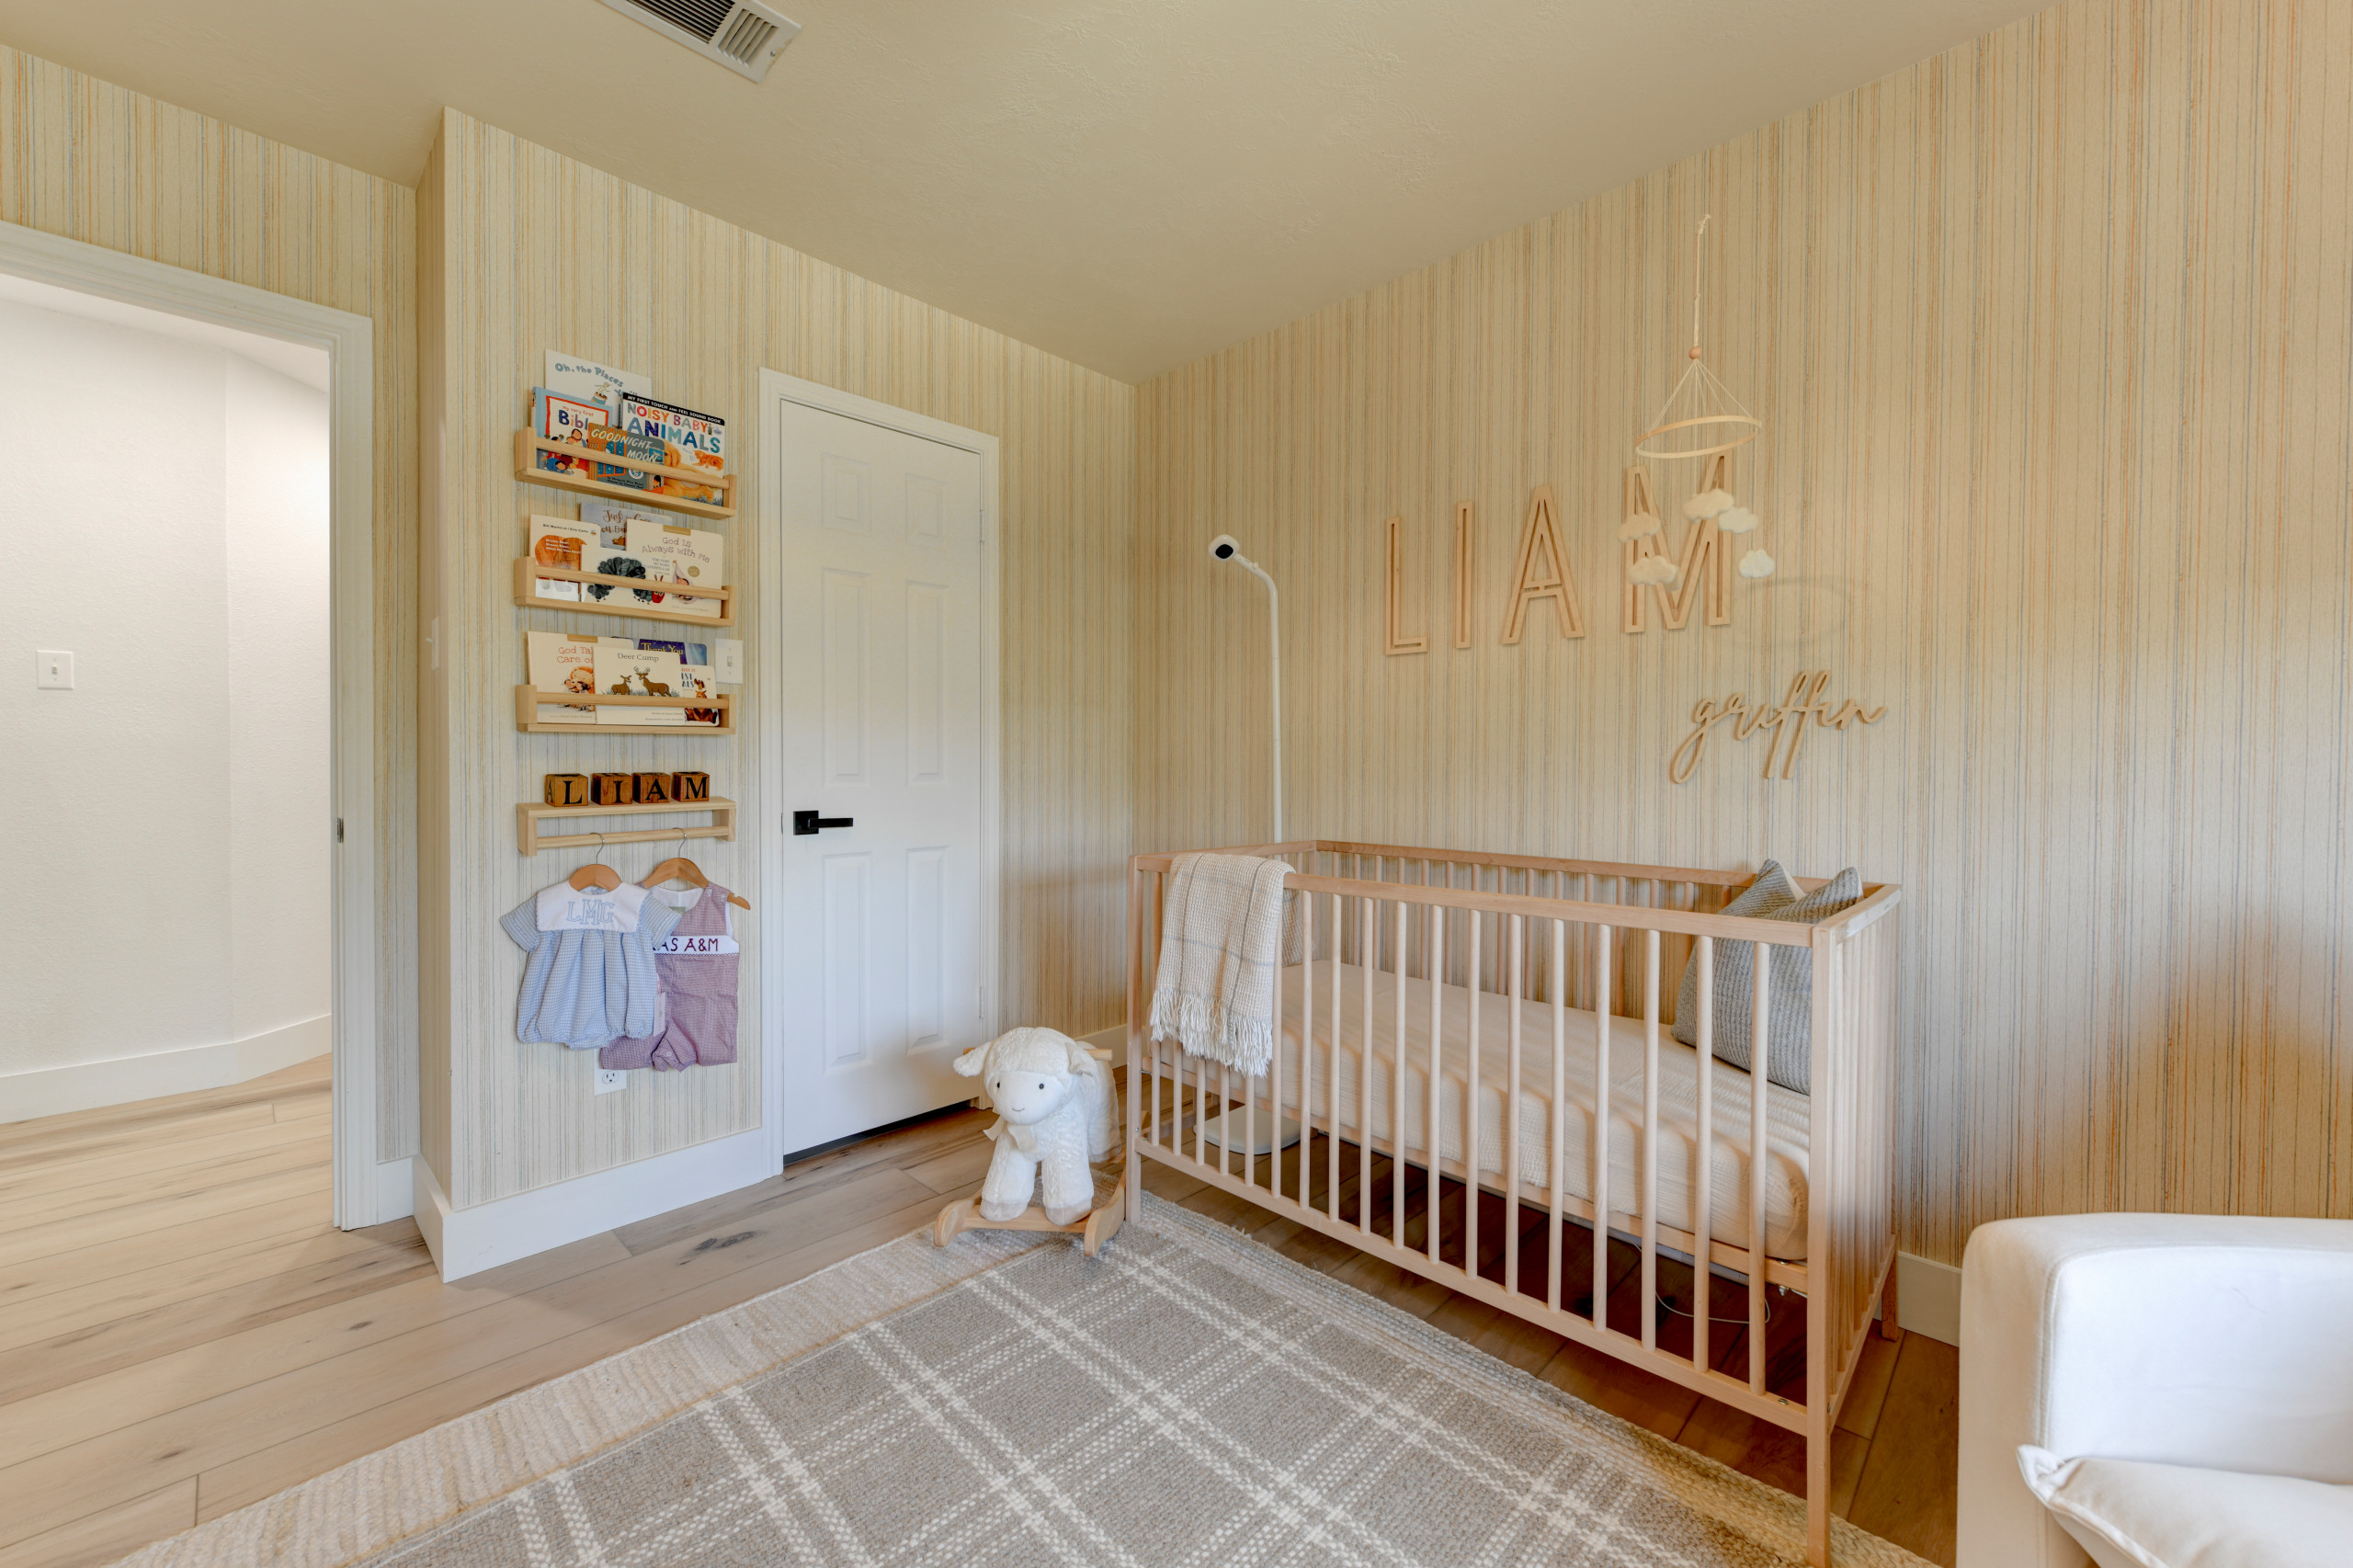 75 Wall Paneling Nursery Ideas You'll Love - March, 2024